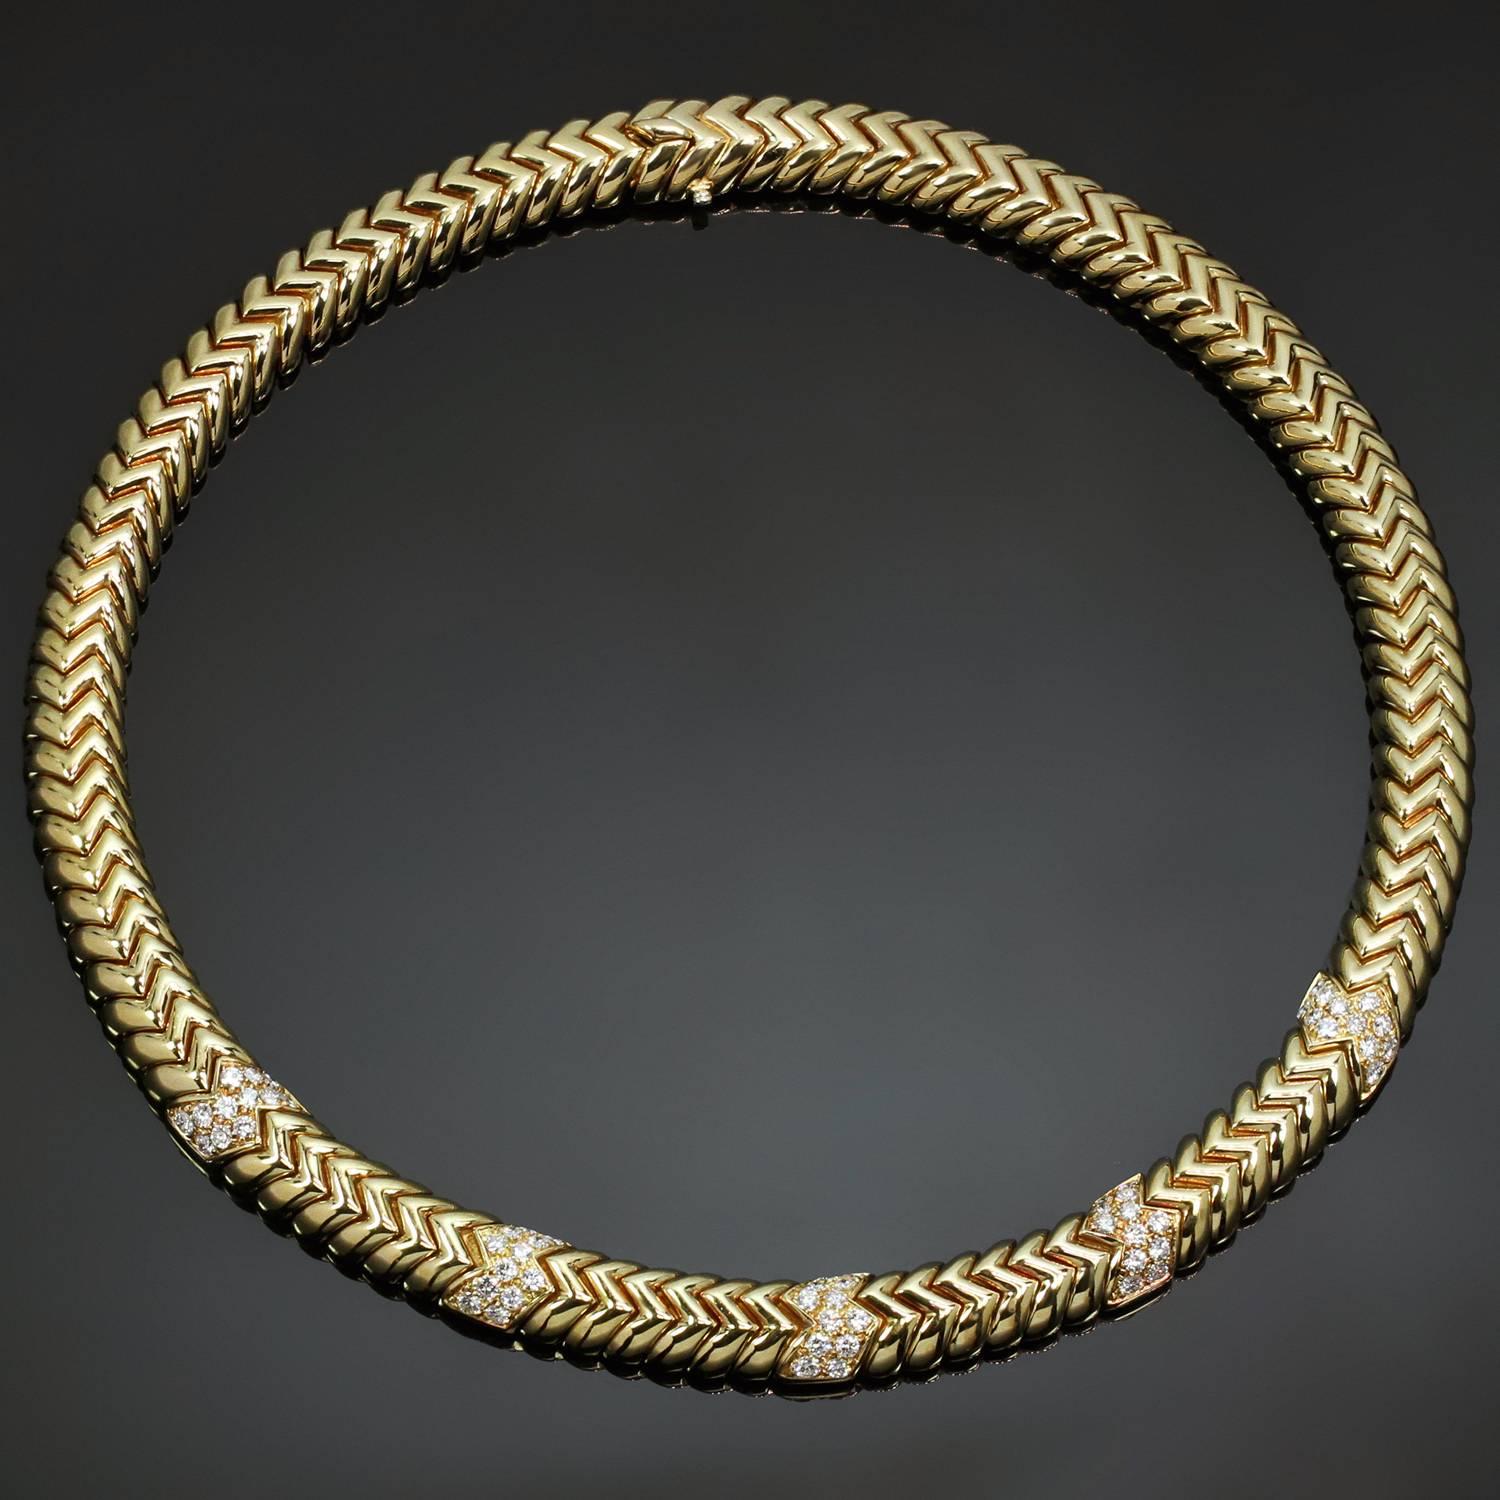 This fabulous Bulgari necklace from the famous Spiga collection features chic geometric links crafted in 18k yellow gold and accented with brilliant-cut diamonds of an estimated 3.60 carats. Made in Italy circa 1990s. Measurements: 0.38